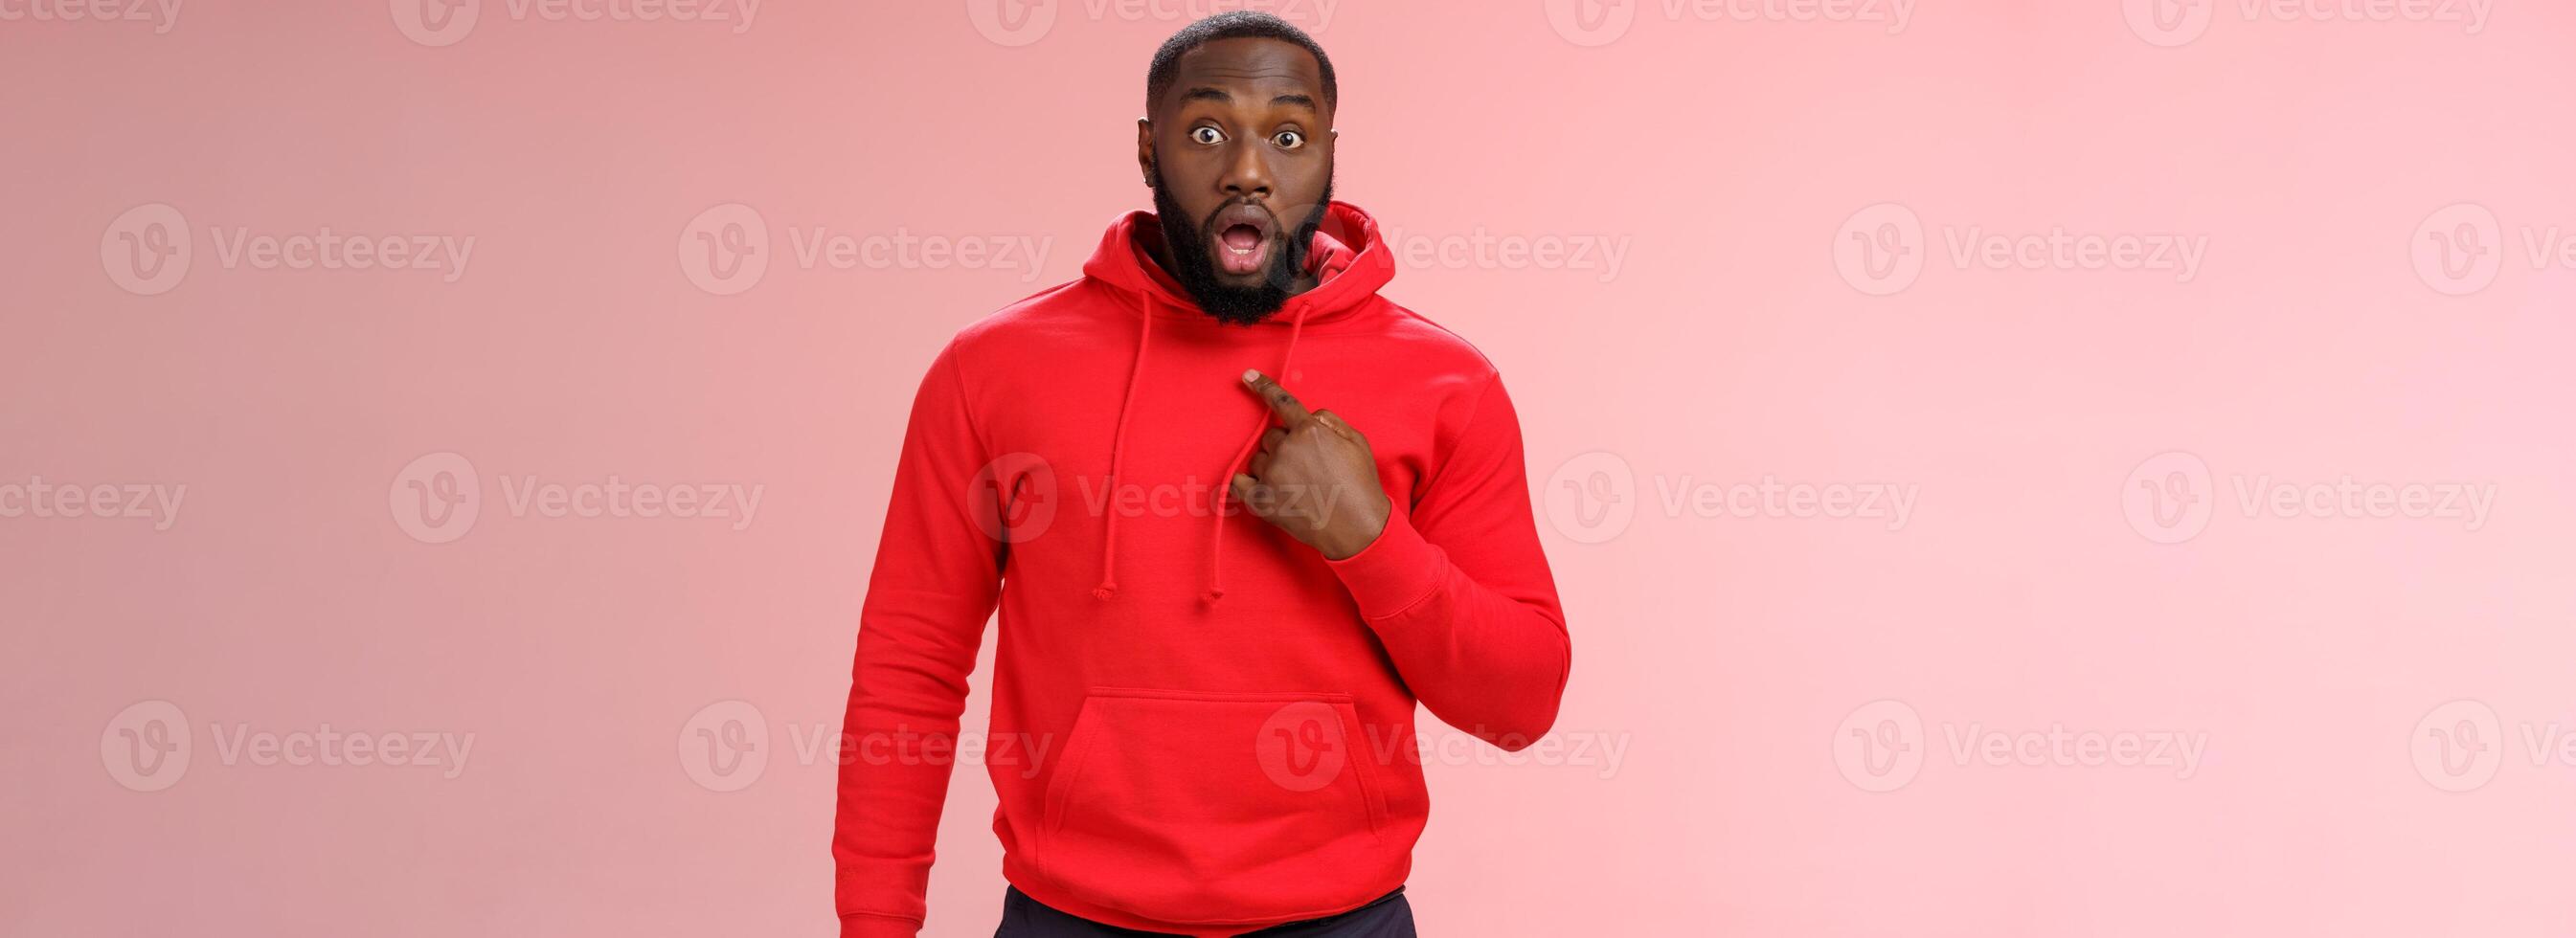 Shocked guy cannot believe he chosen drop jaw widen eyes staring camera speechless pointing himself impressed cannot believe picked do important task, standing stunned pink background photo